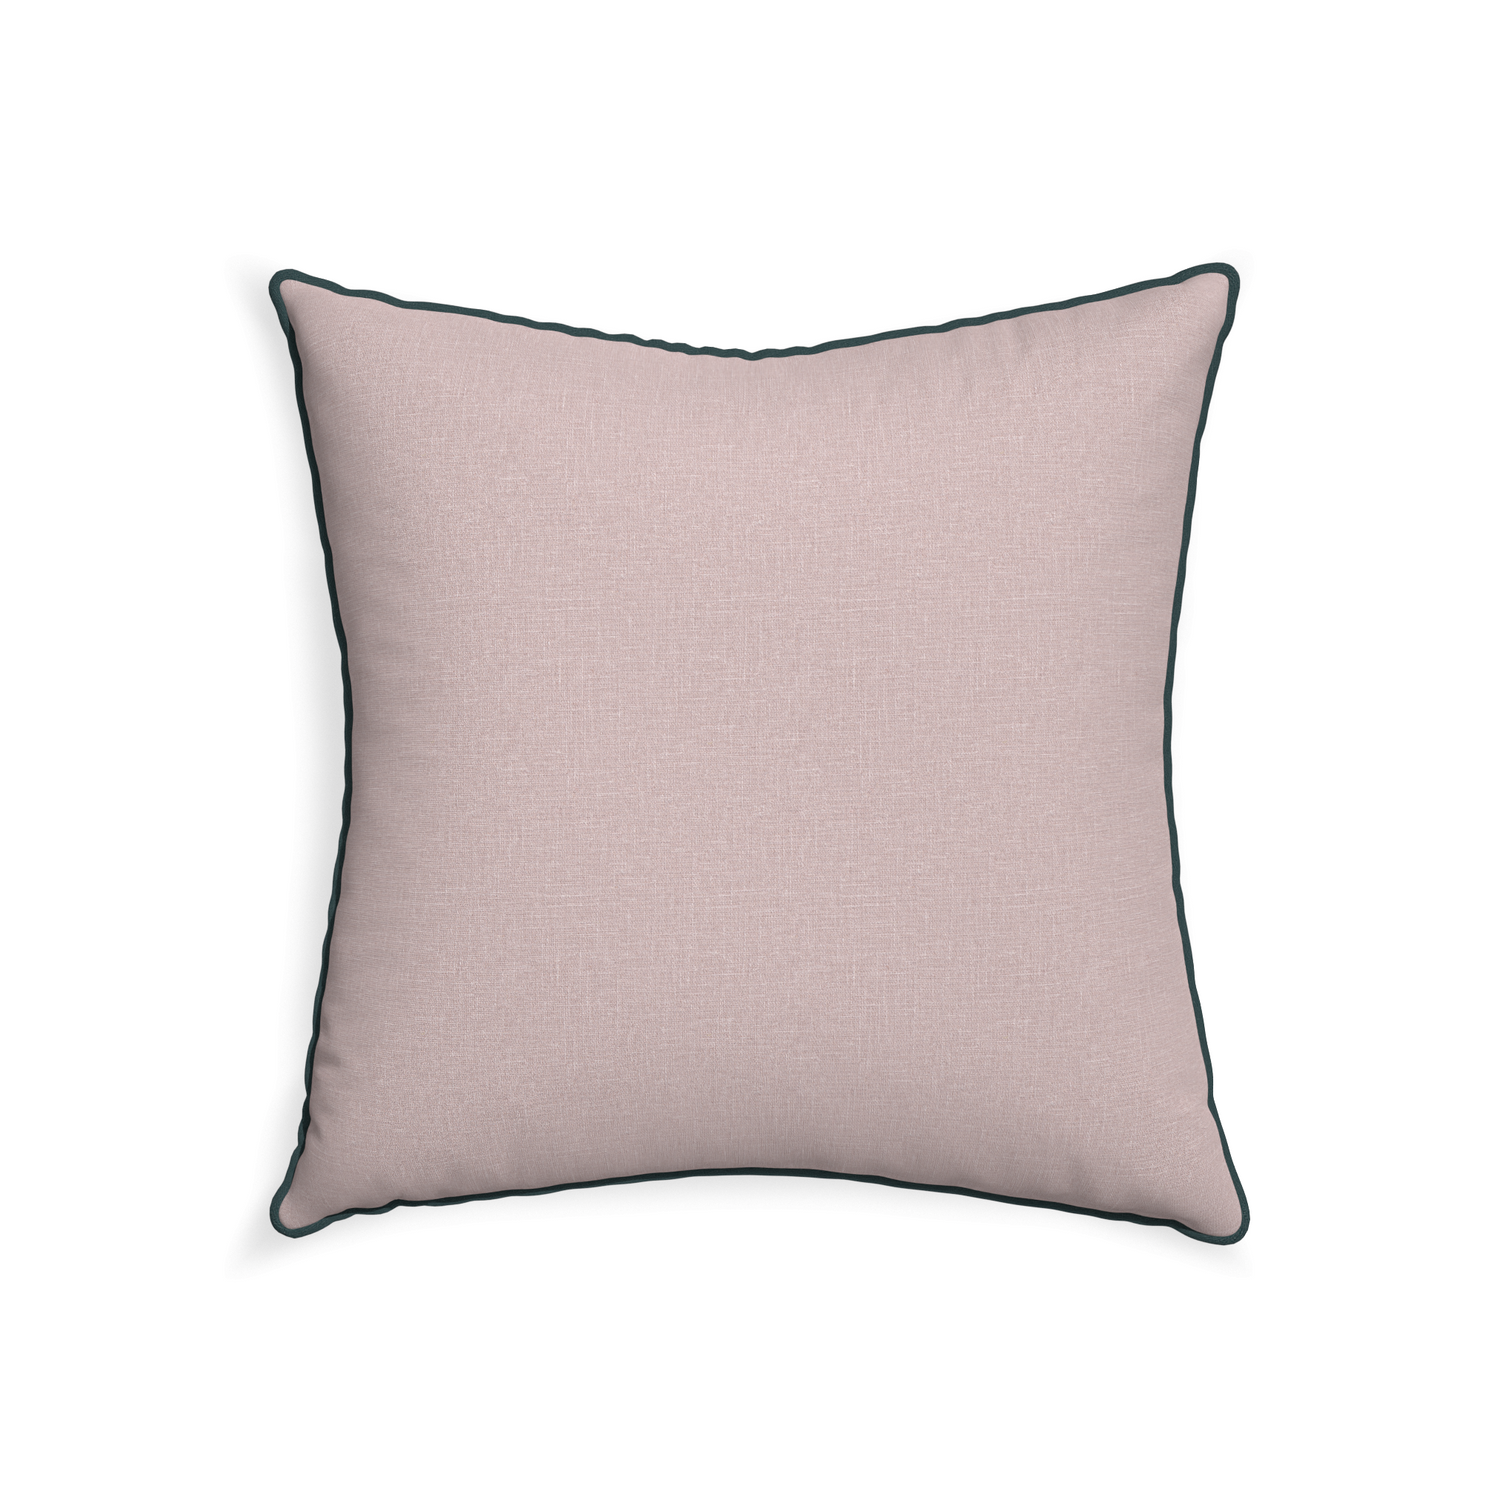 22-square orchid custom mauve pinkpillow with p piping on white background